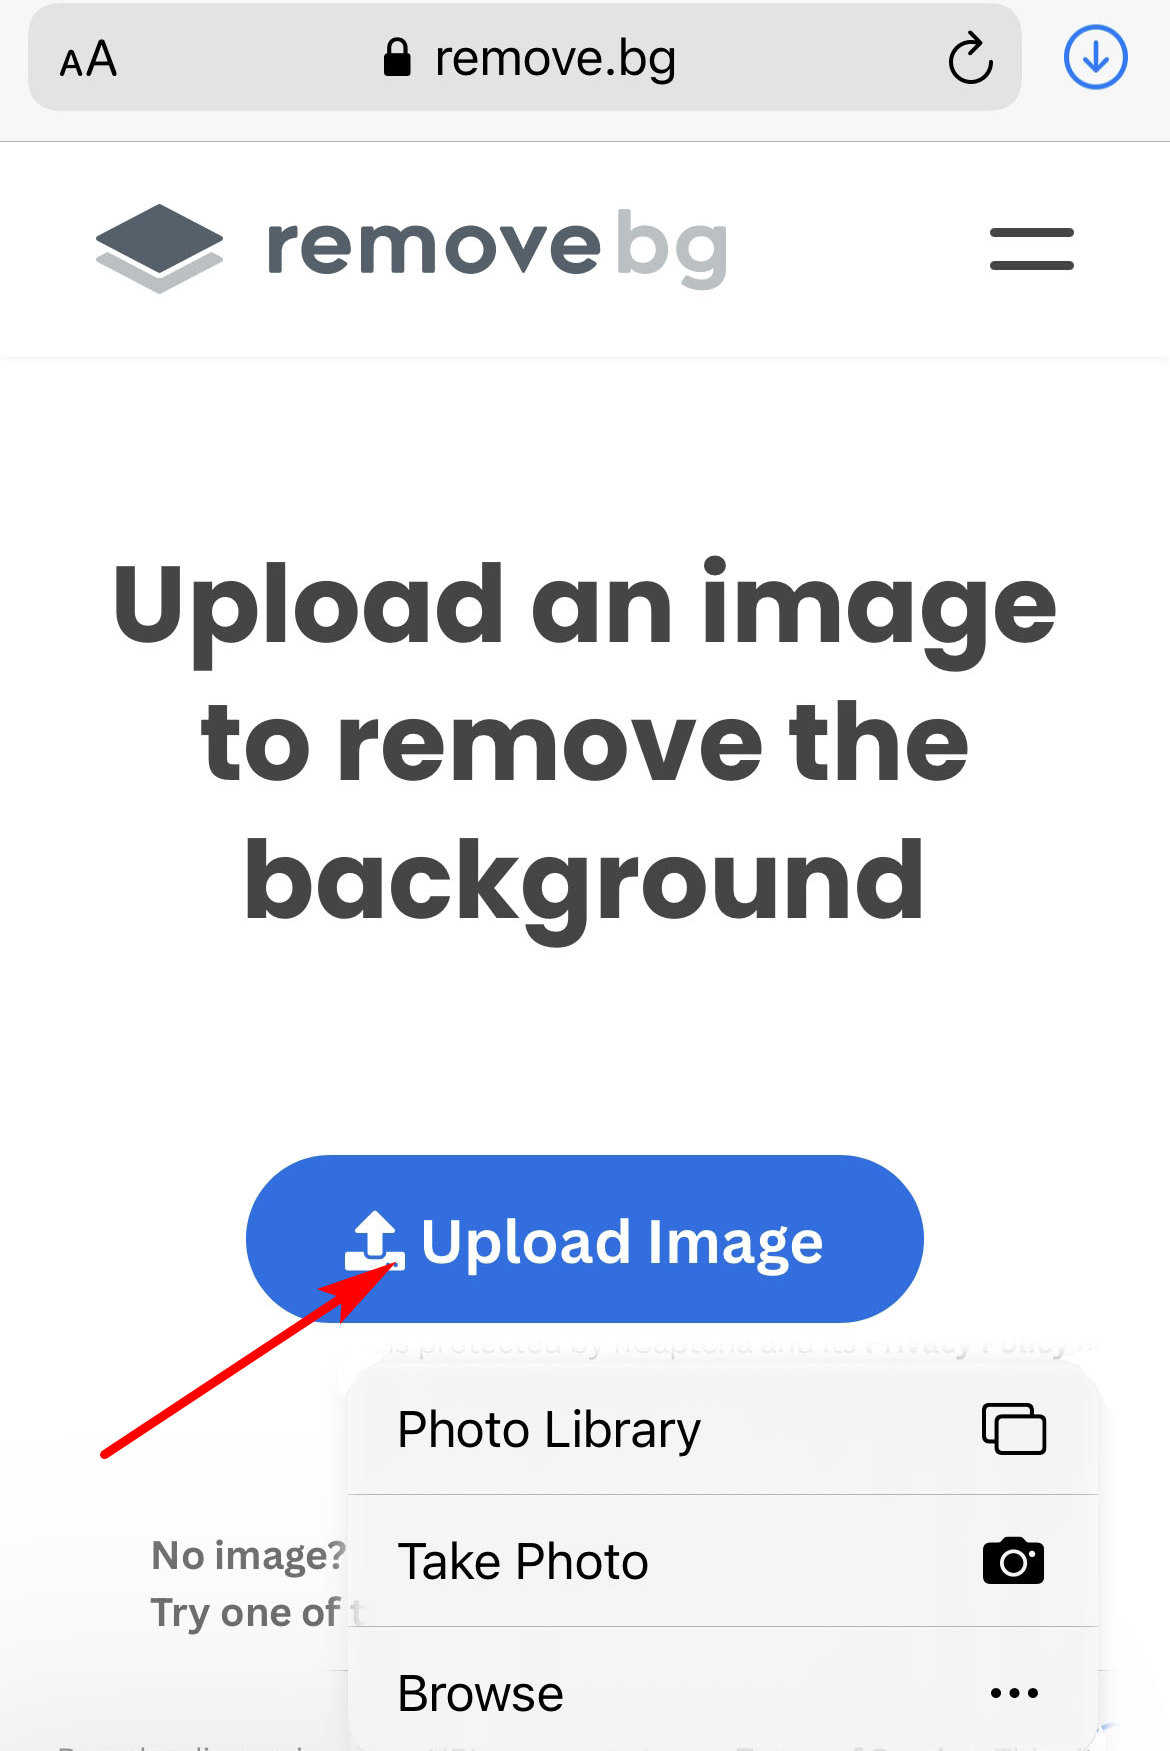 Upload an image in remove.bg